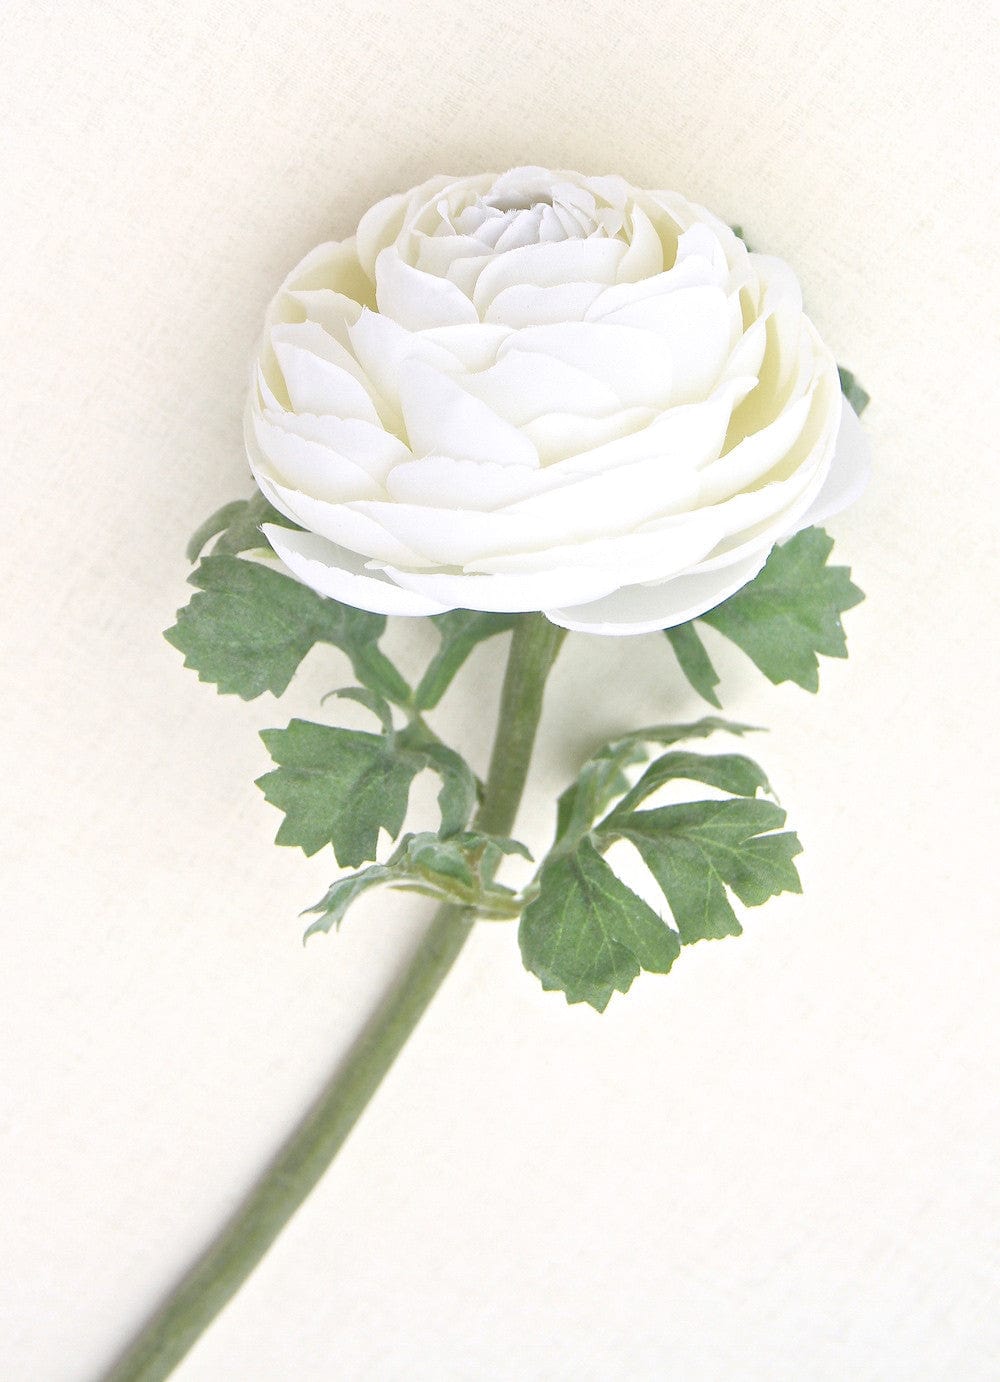 Realistic and lifelike artificial fake silk flower highest quality white ranunculus luxury faux flowers from Amaranthine Blooms